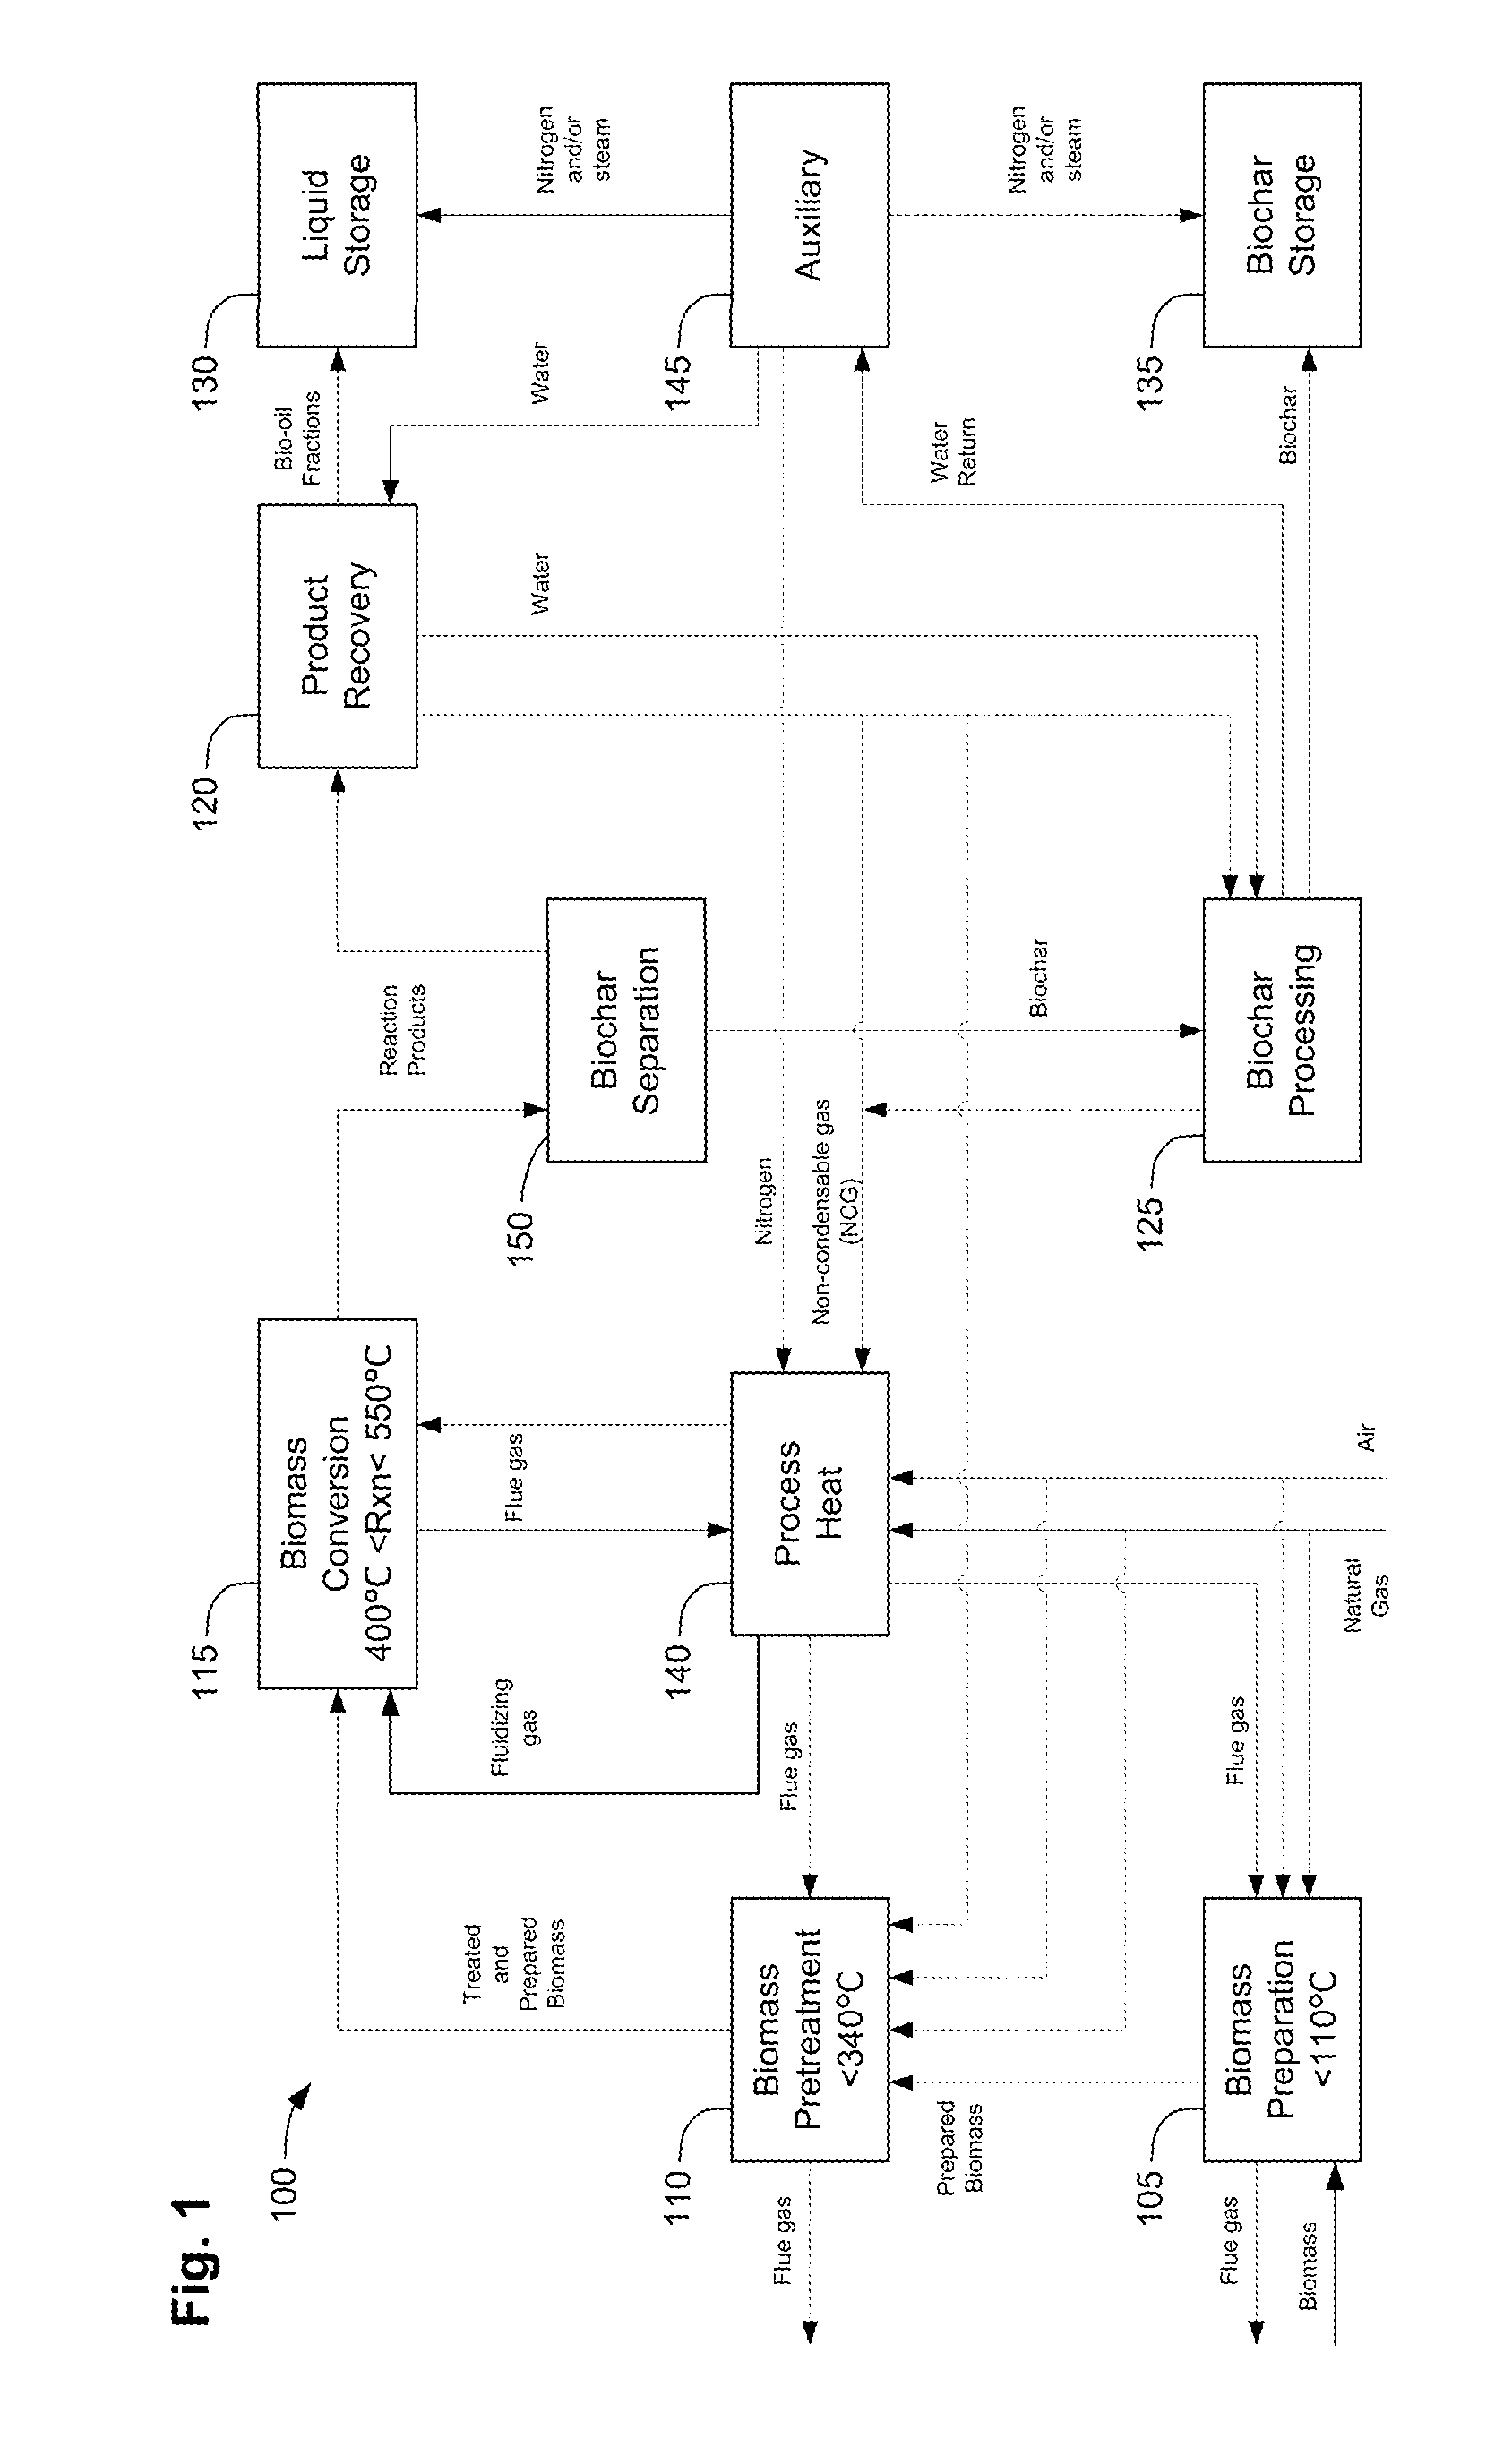 Methods for integrated fast pyrolysis processing of biomass